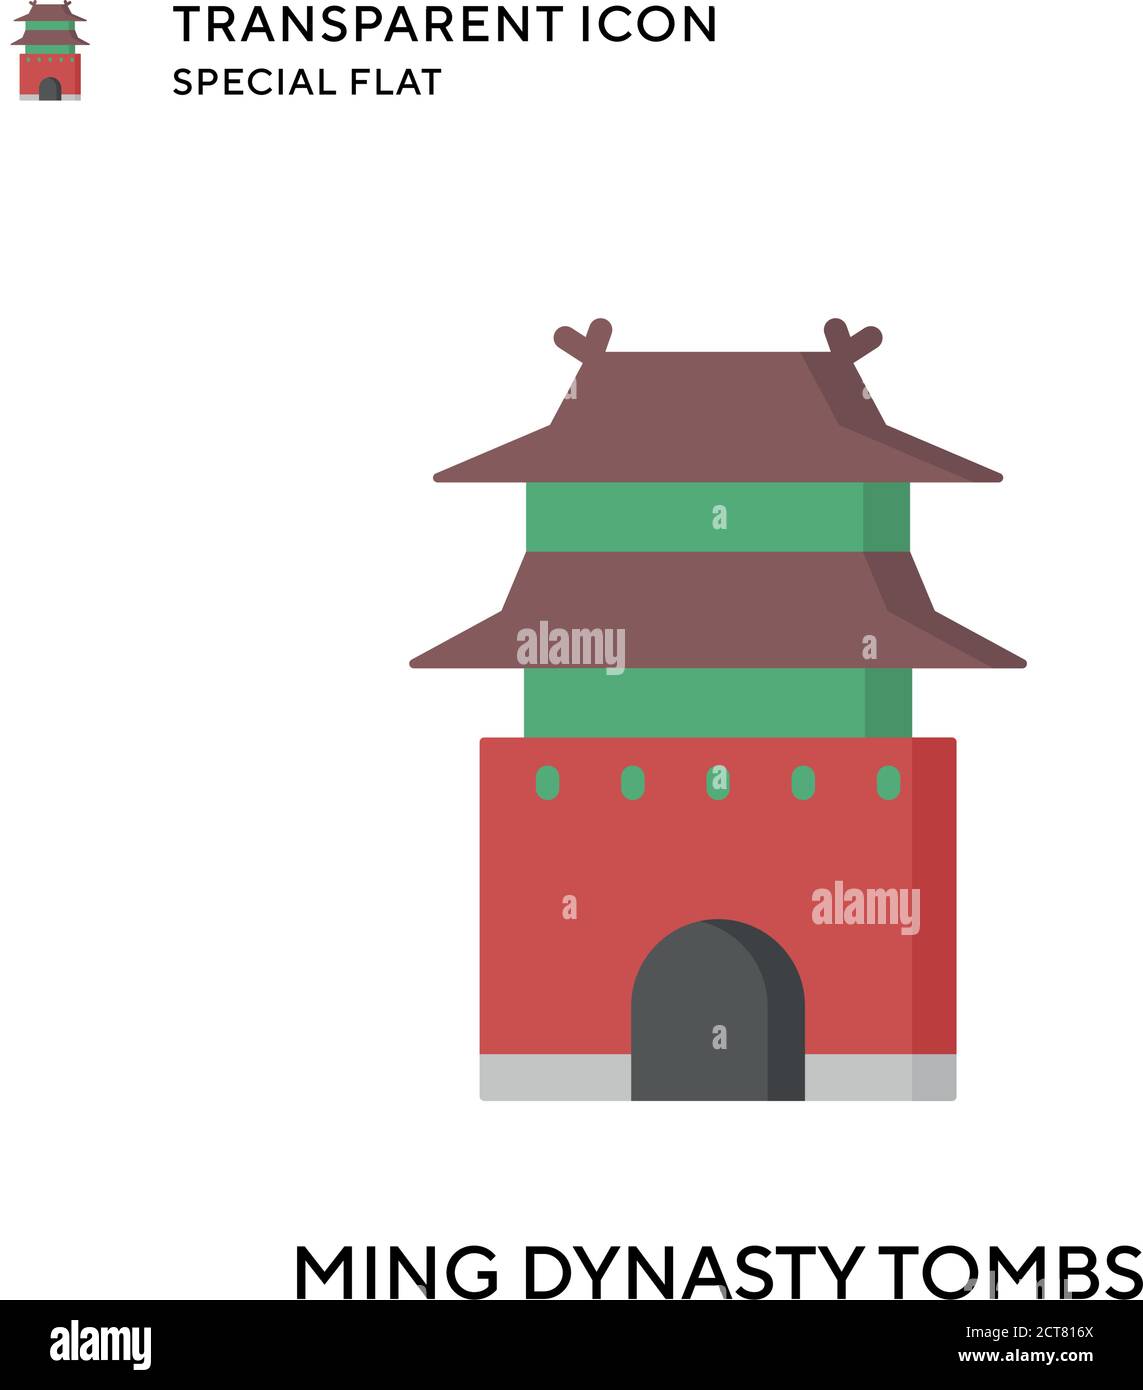 Ming dynasty tombs vector icon. Flat style illustration. EPS 10 vector. Stock Vector